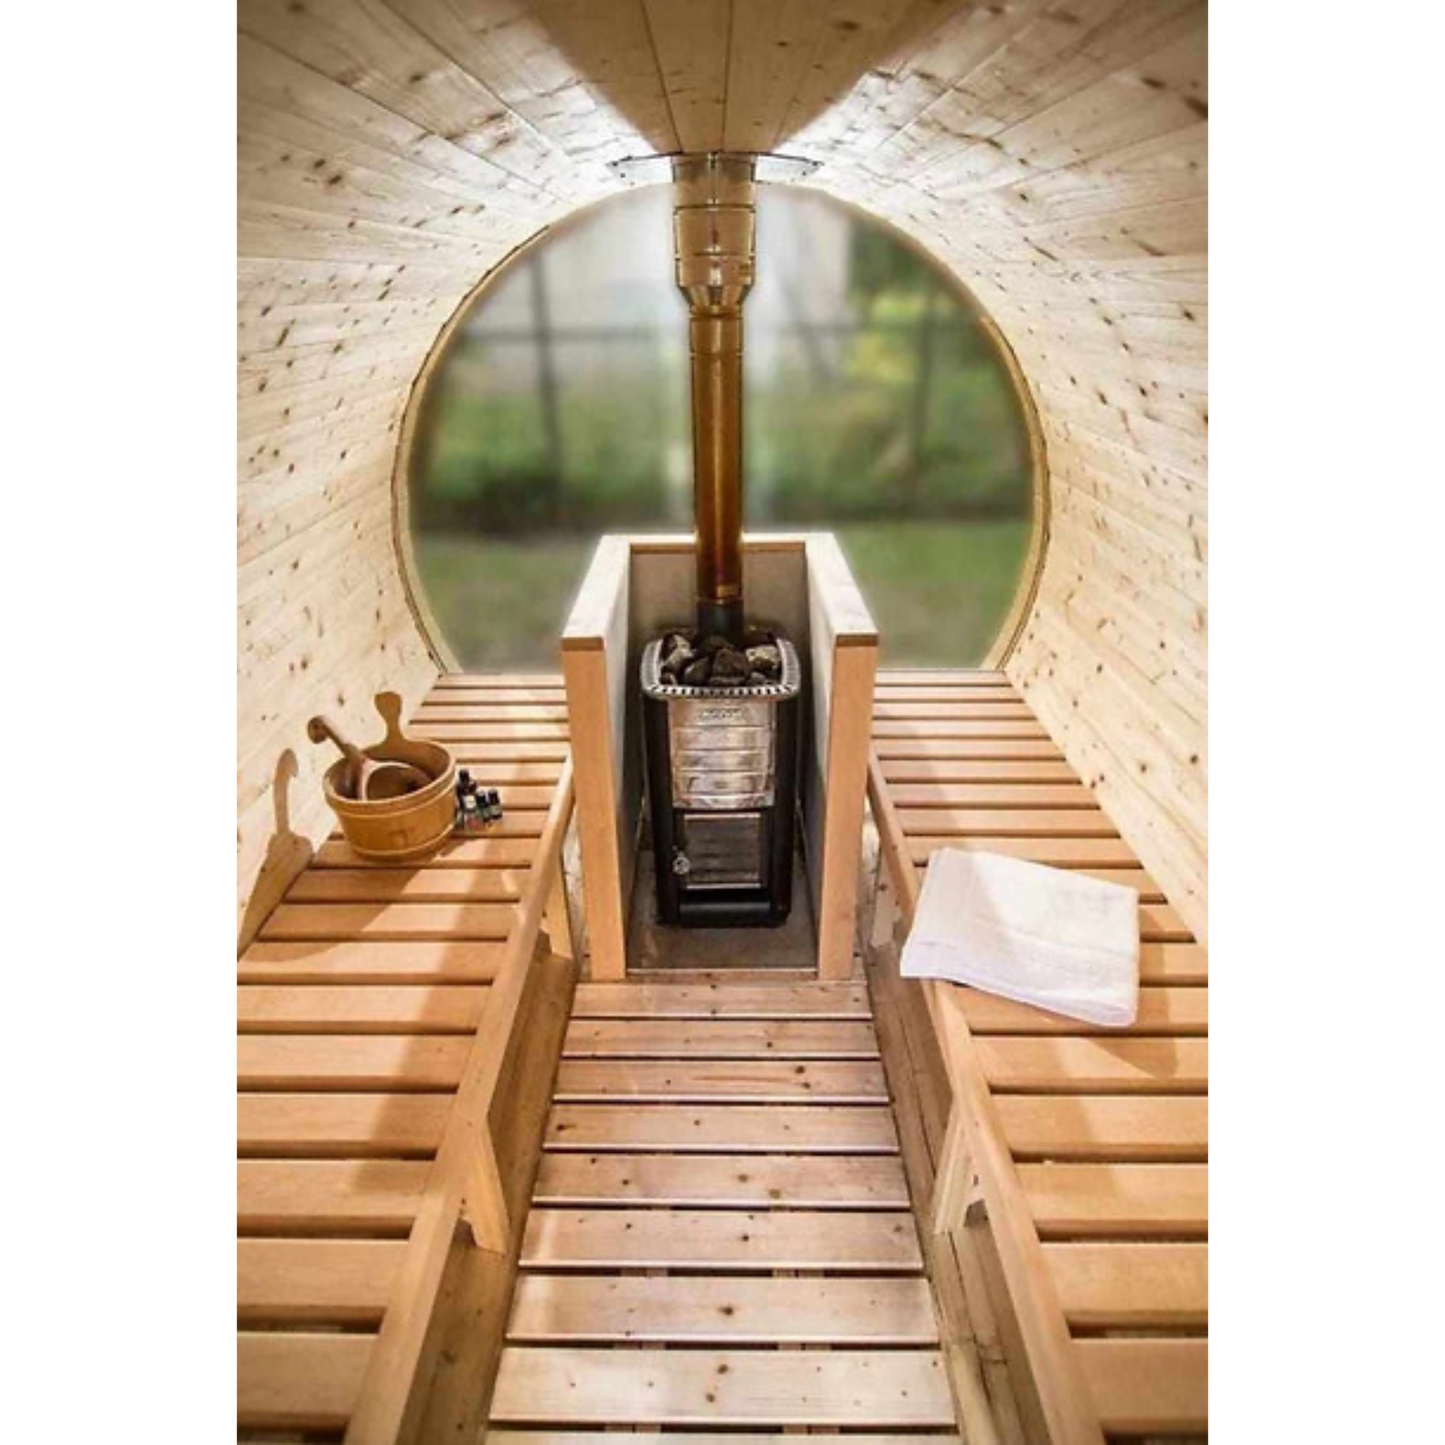 6-8 Person Barrel Sauna200 with Changing Room (4.1 Metres)